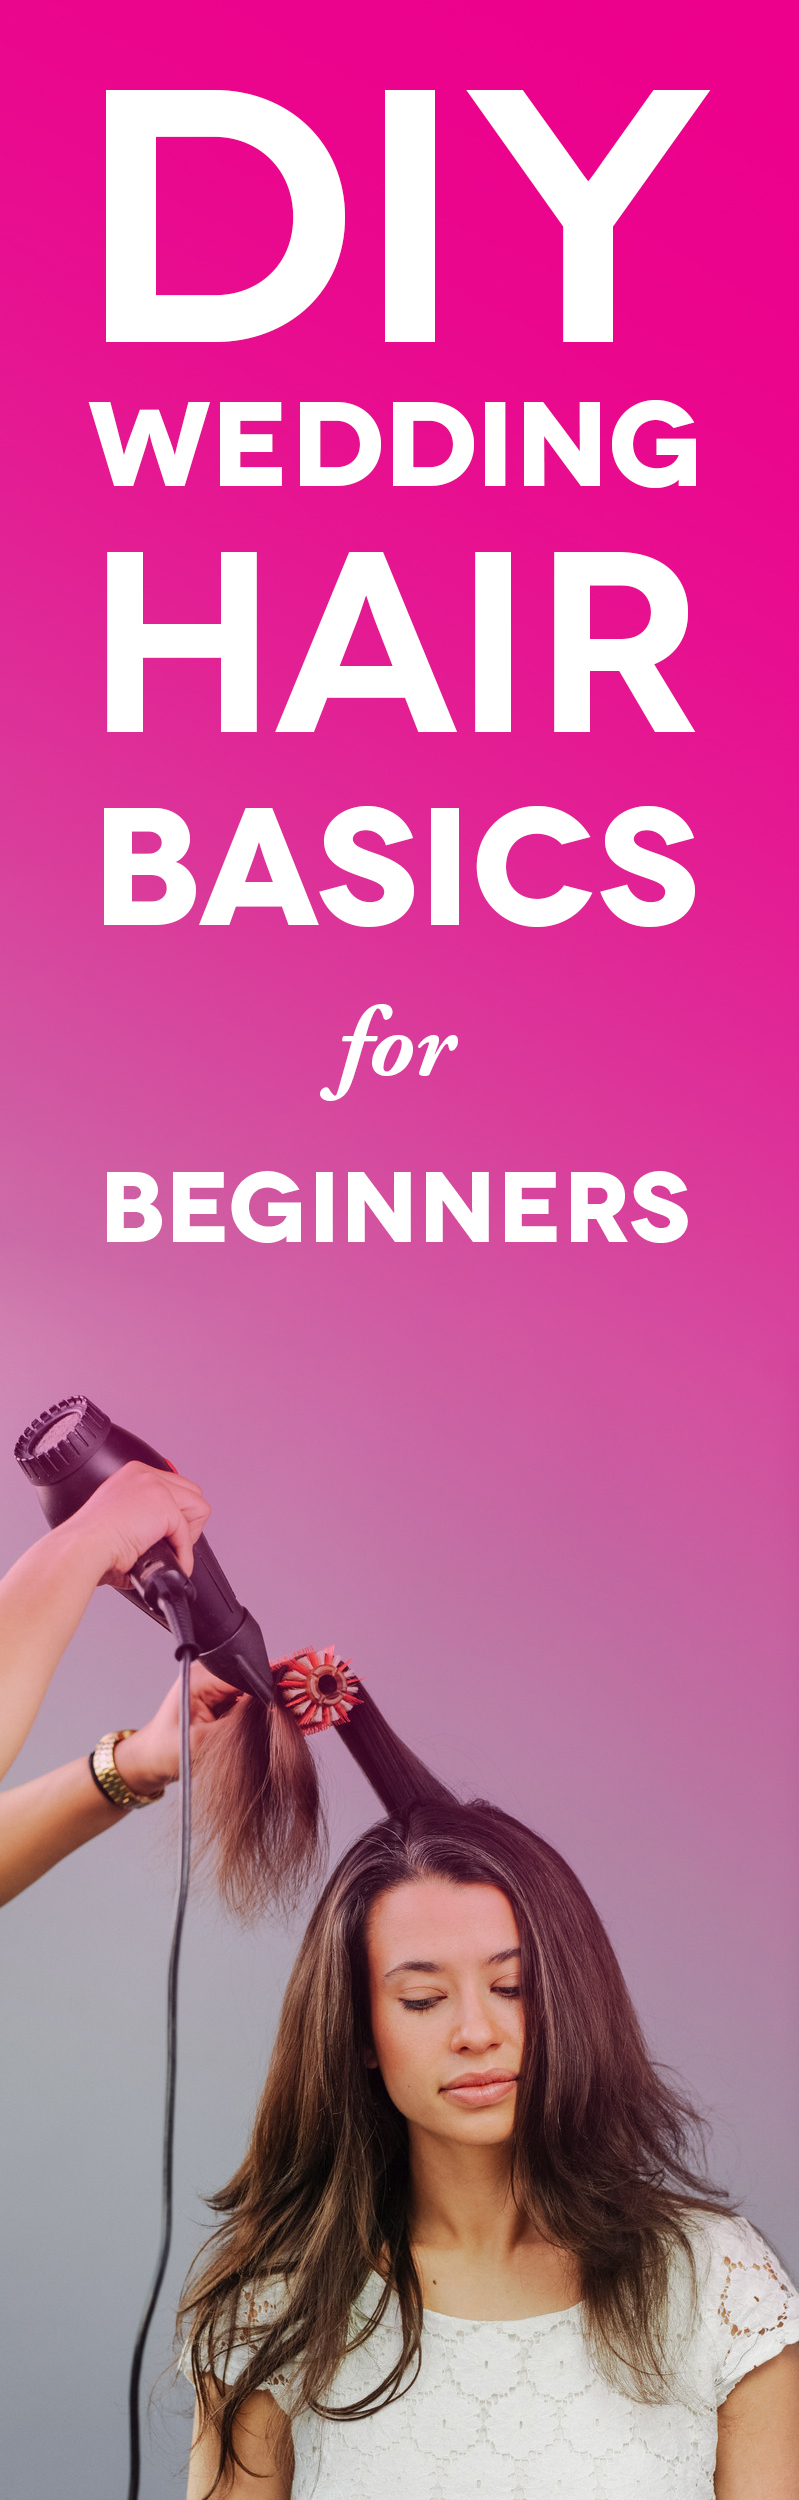 Graphic with words "DIY Wedding Hair basics for beginners" over girl getting hair blowdried